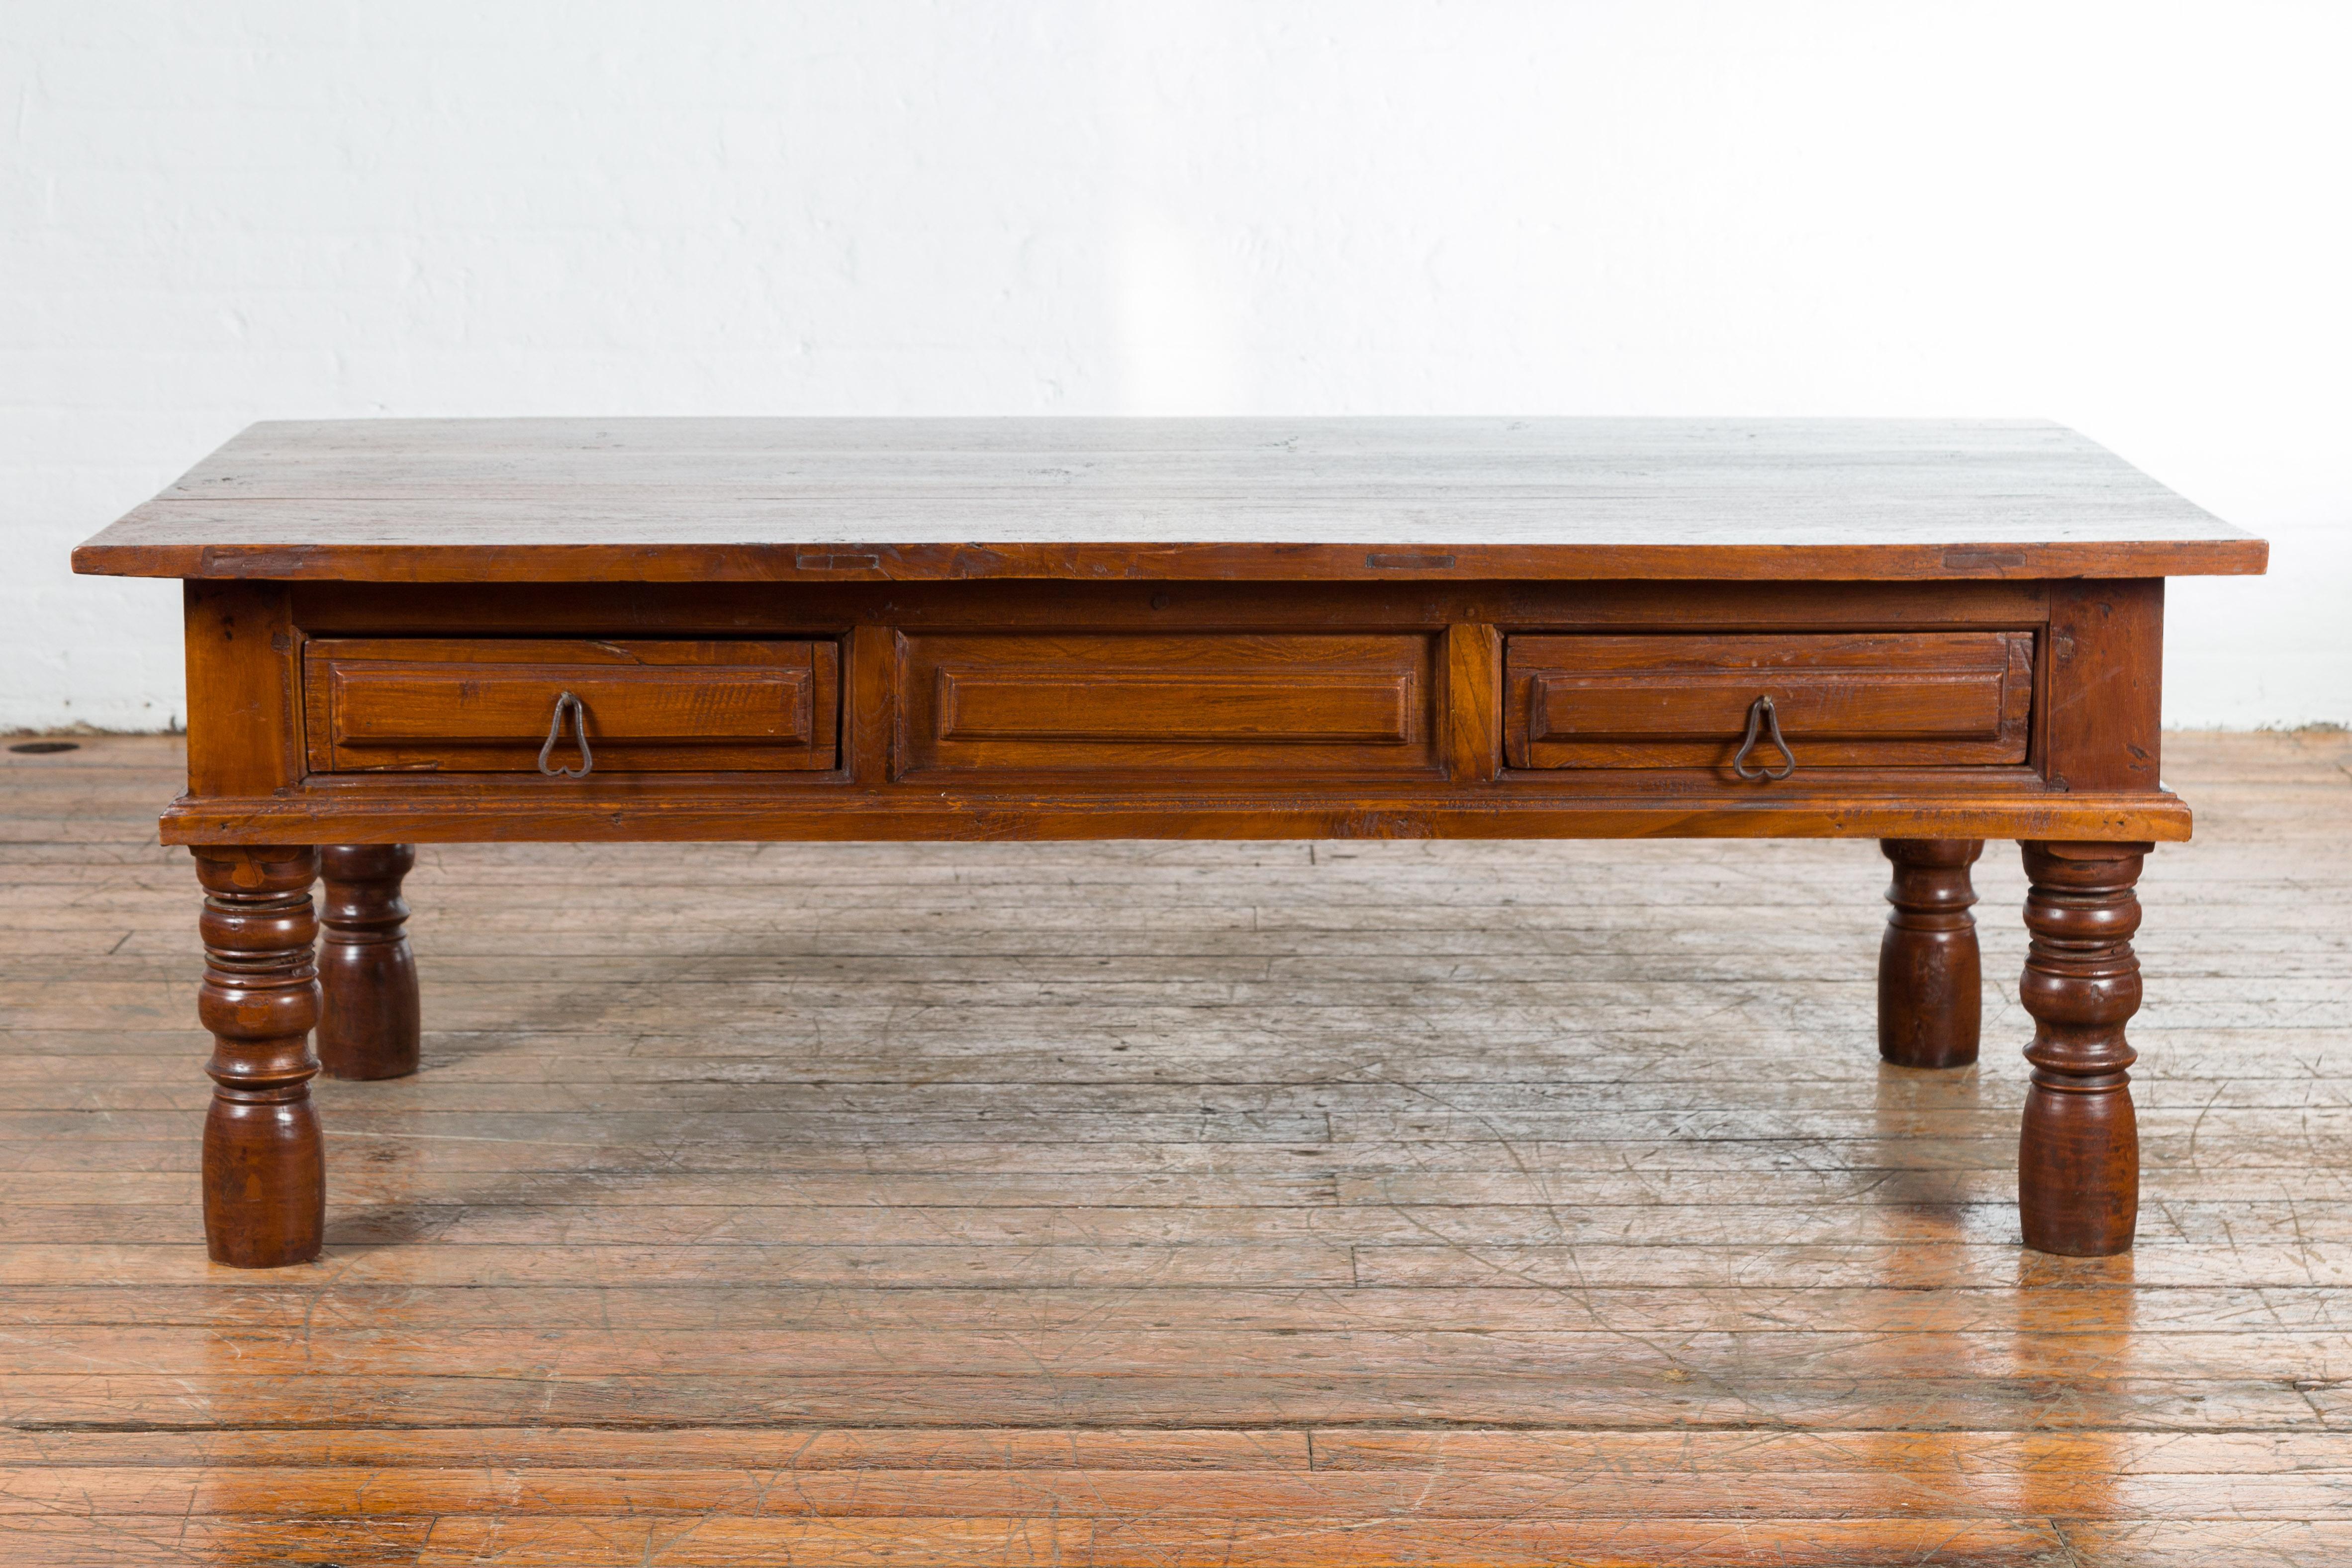 An Indian vintage coffee table from the mid 20th century, with two drawers and baluster legs. Created in India during the midcentury period, this coffee table features a rectangular planked top sitting above two drawers with raised panels and iron